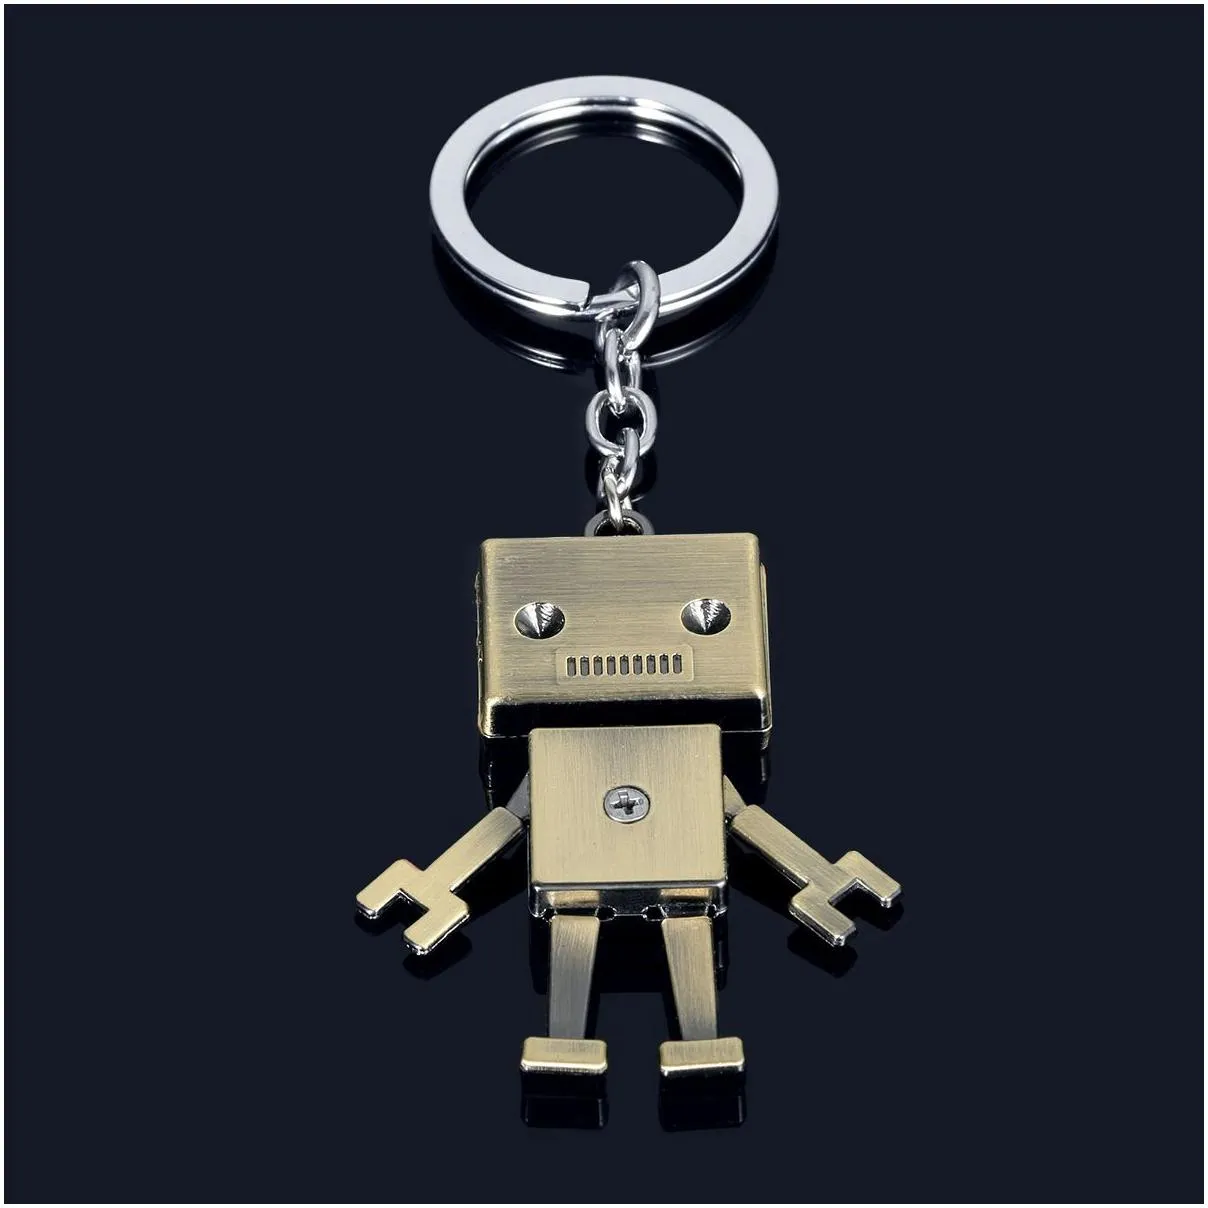  ship retro robot model metal keychain pendant gifts key rings gskr101 mix order 20 pieces a lot keychains